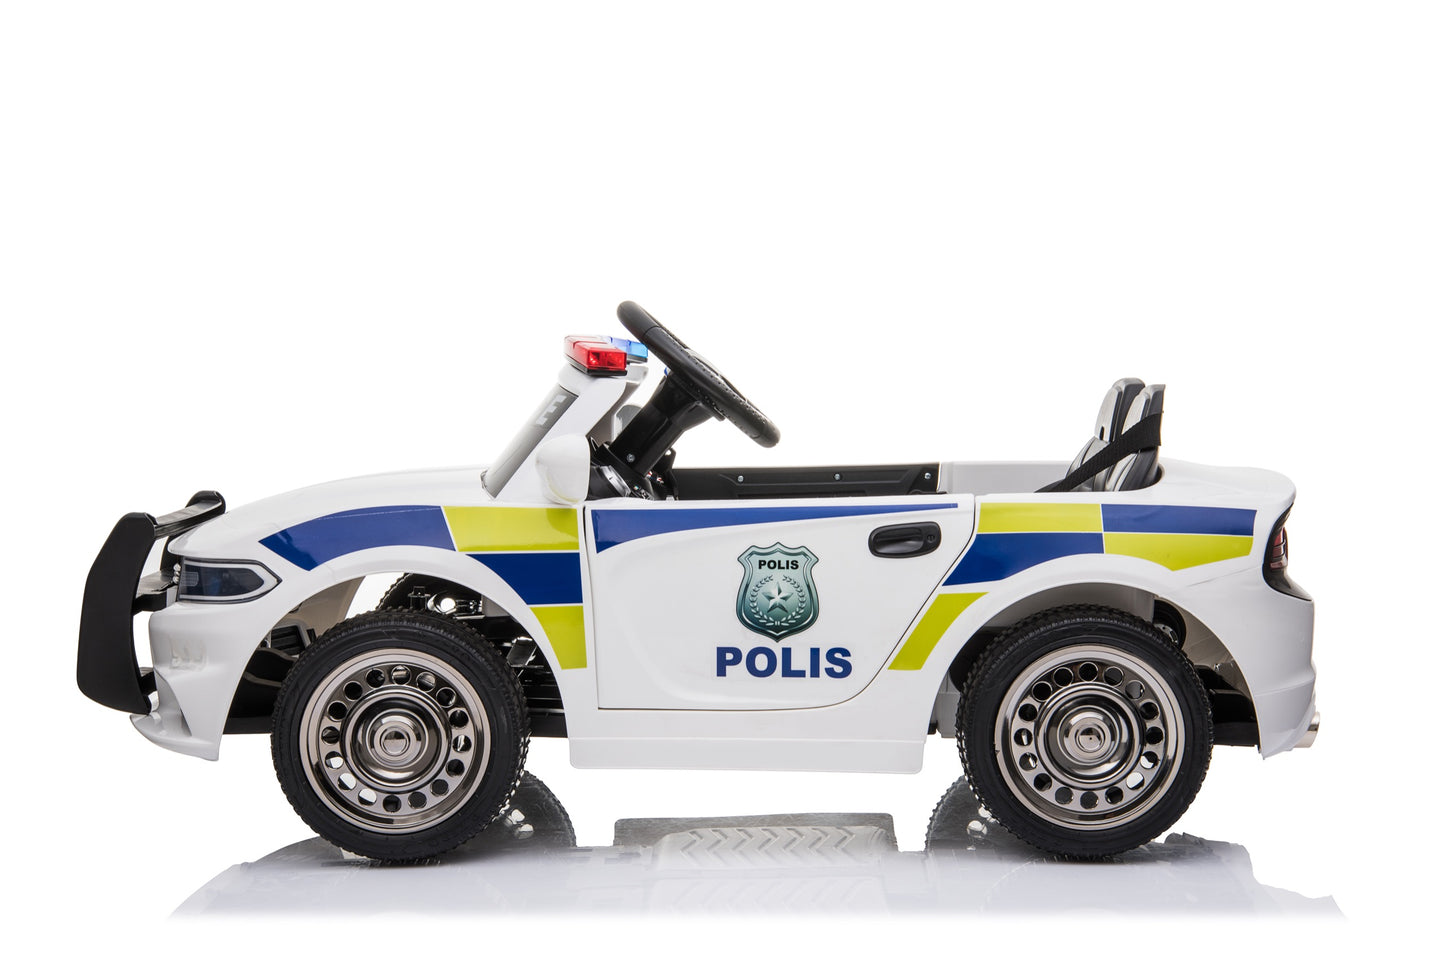 Custom Dodge kids police 12v Ride on car with Siren, Loud Speaker and Remote